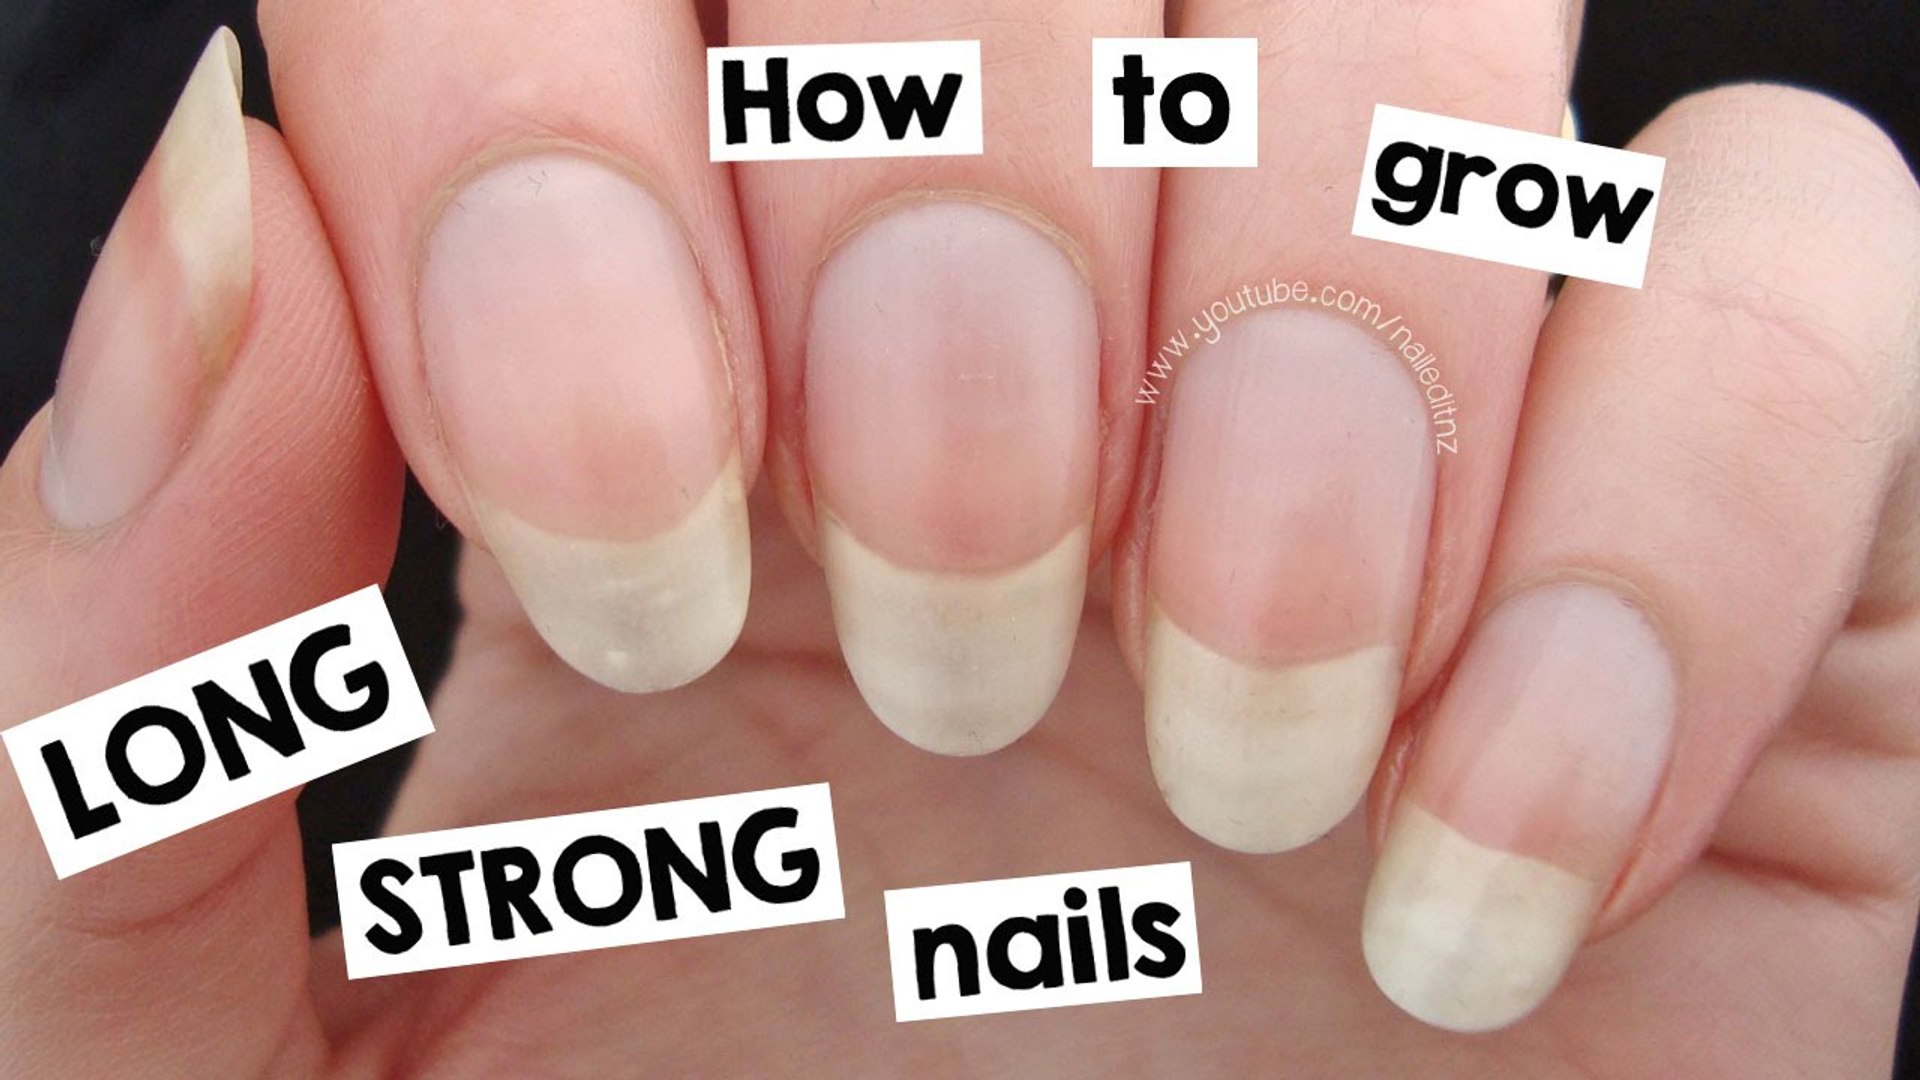 How to Grow Nails Faster Naturally - How to grow stronger nails naturally -  Home Remedies for Nail Growth - Make your Nails grow faster and strong -  Make Nails Stronger -